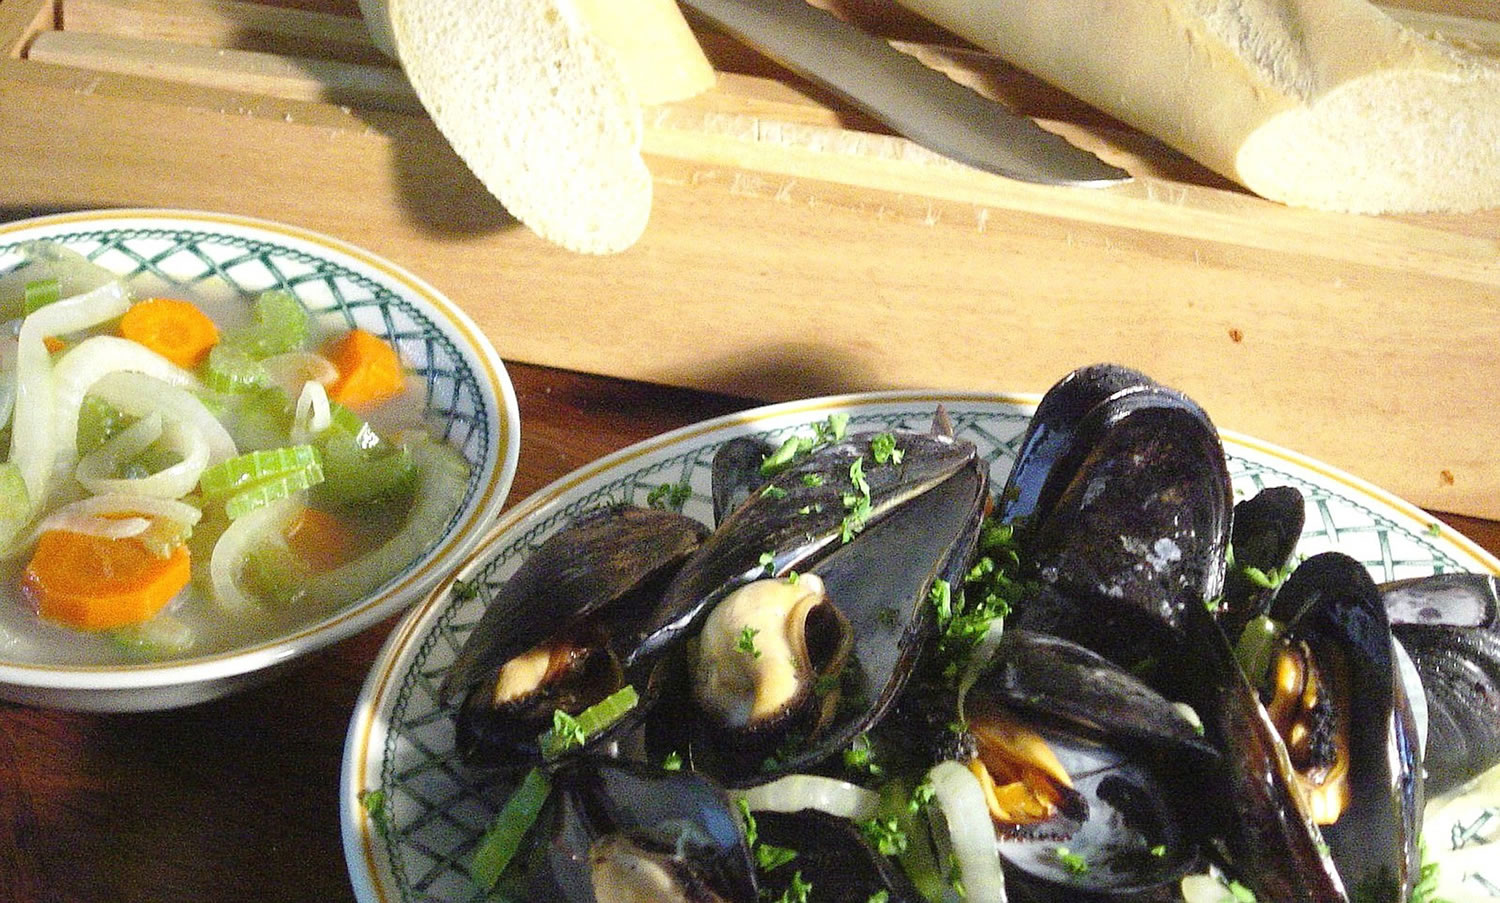 Moules a la Mariniere, or mussels in white wine.